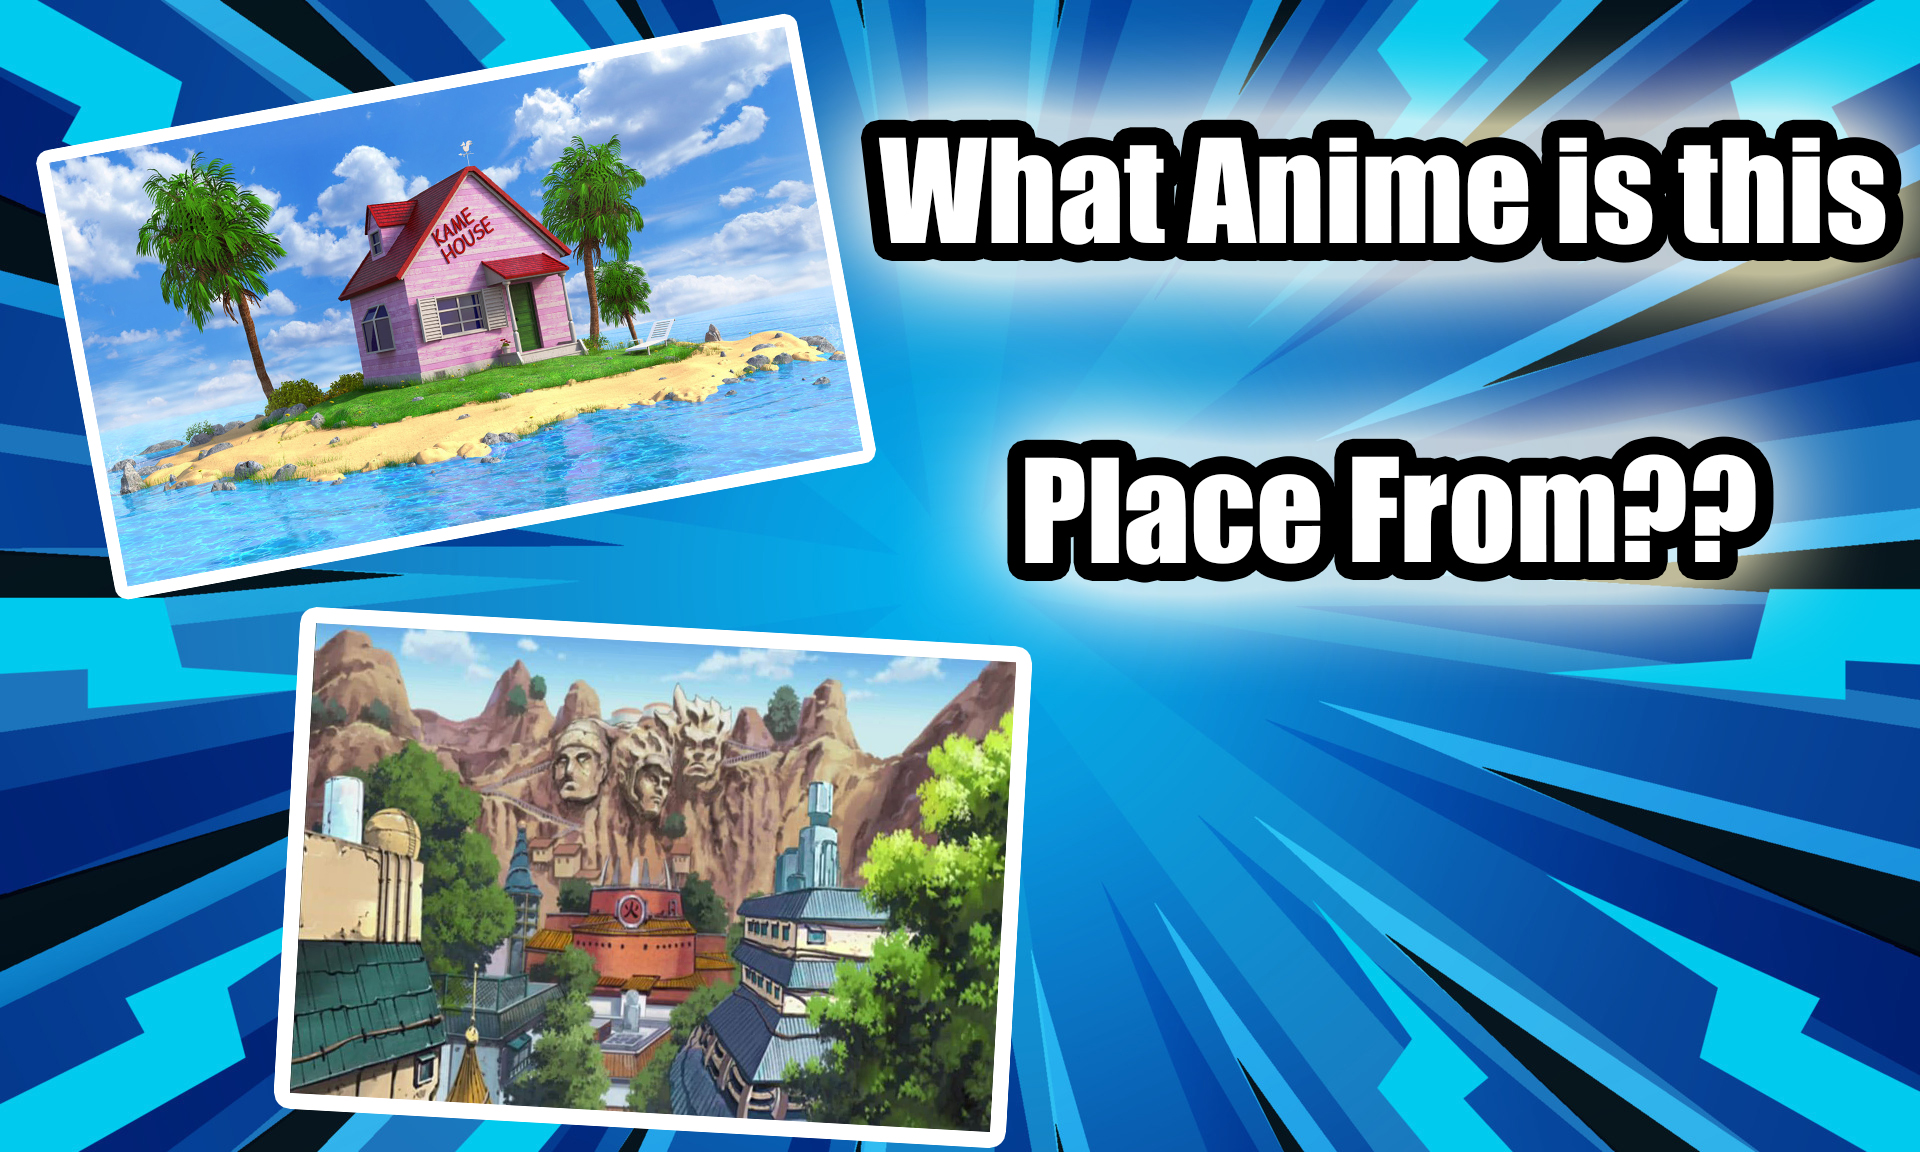 Quiz: What Anime is this Place from? - TriviaCreator